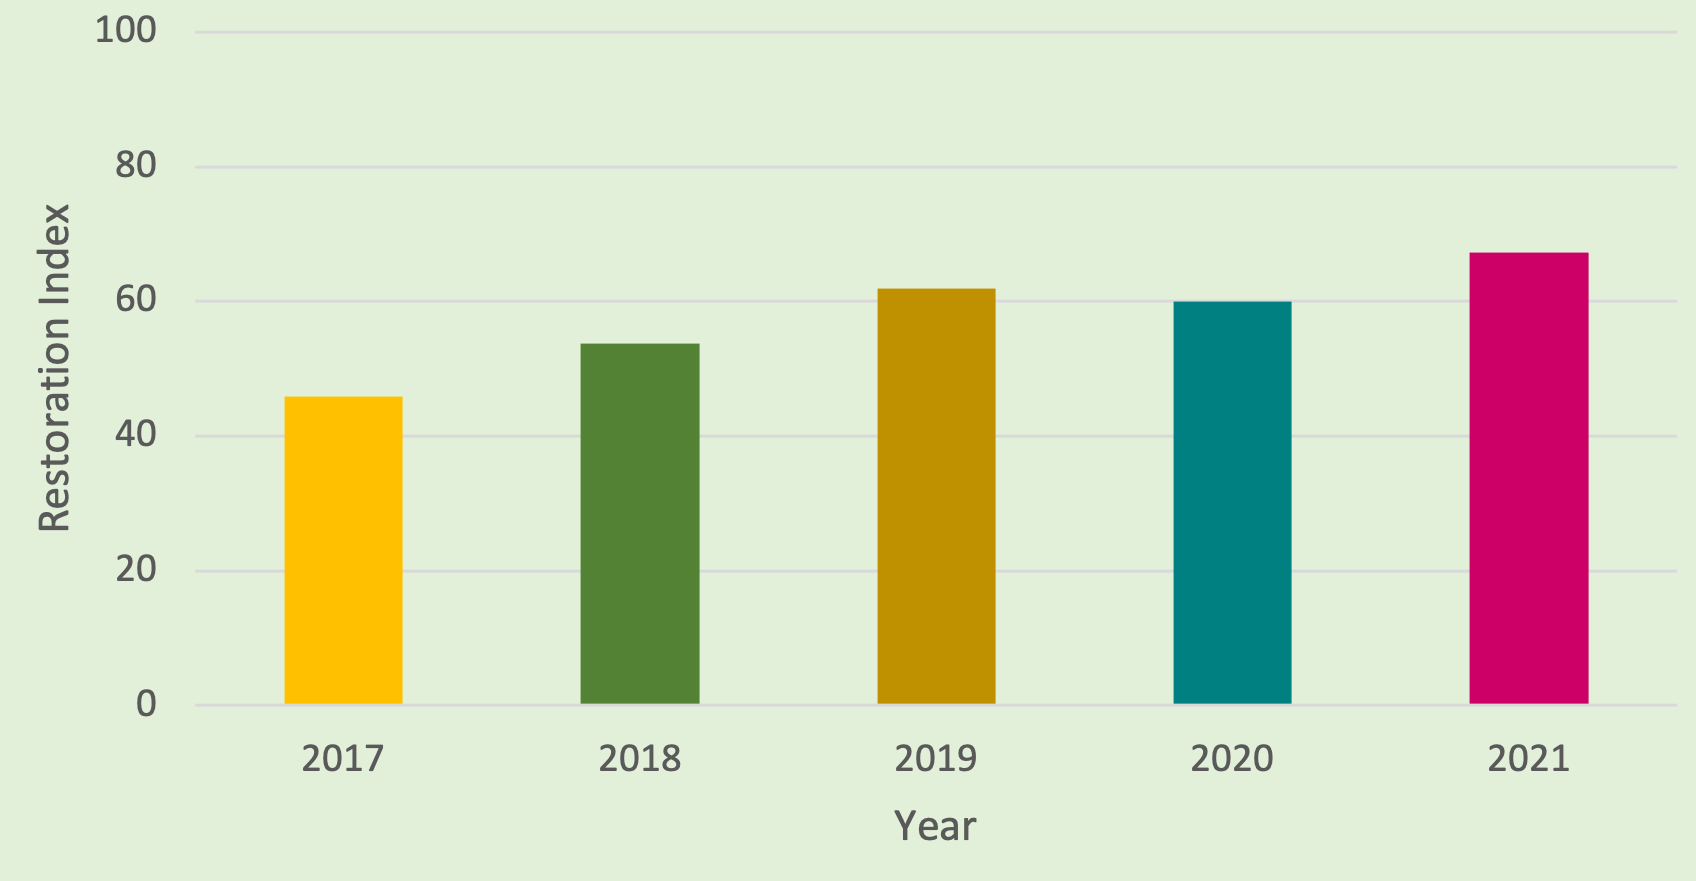 A bar chart depicting the increase in average plant coverage restoration index from 2017 to 2021 for the bofedal wetlands crossed by a pipeline in the Andes.